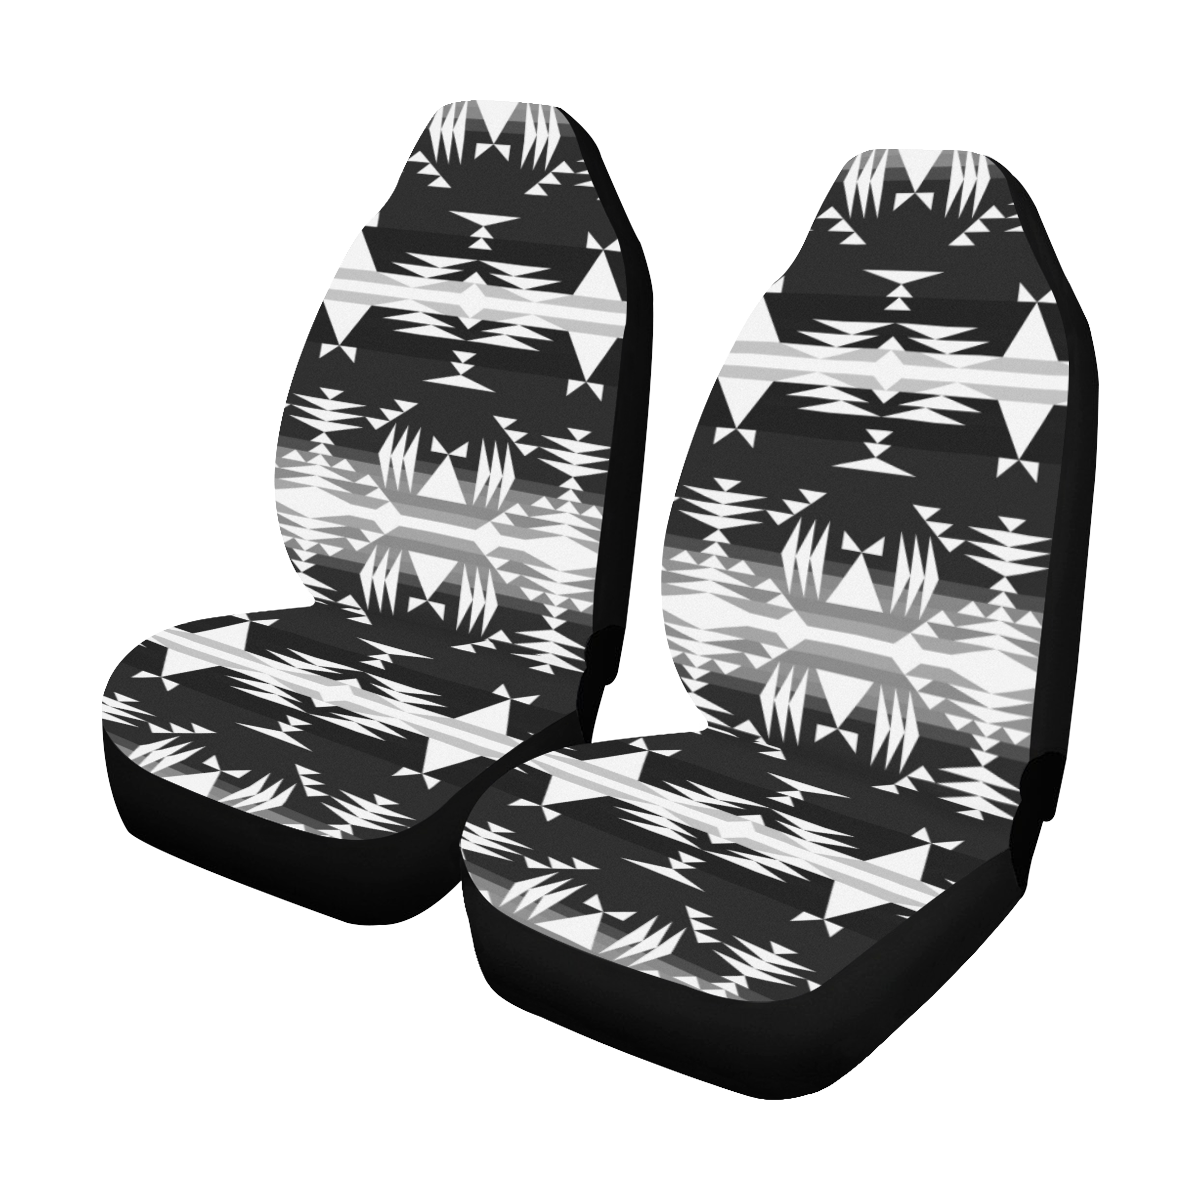 Between the Mountains Black and White Car Seat Covers (Set of 2)